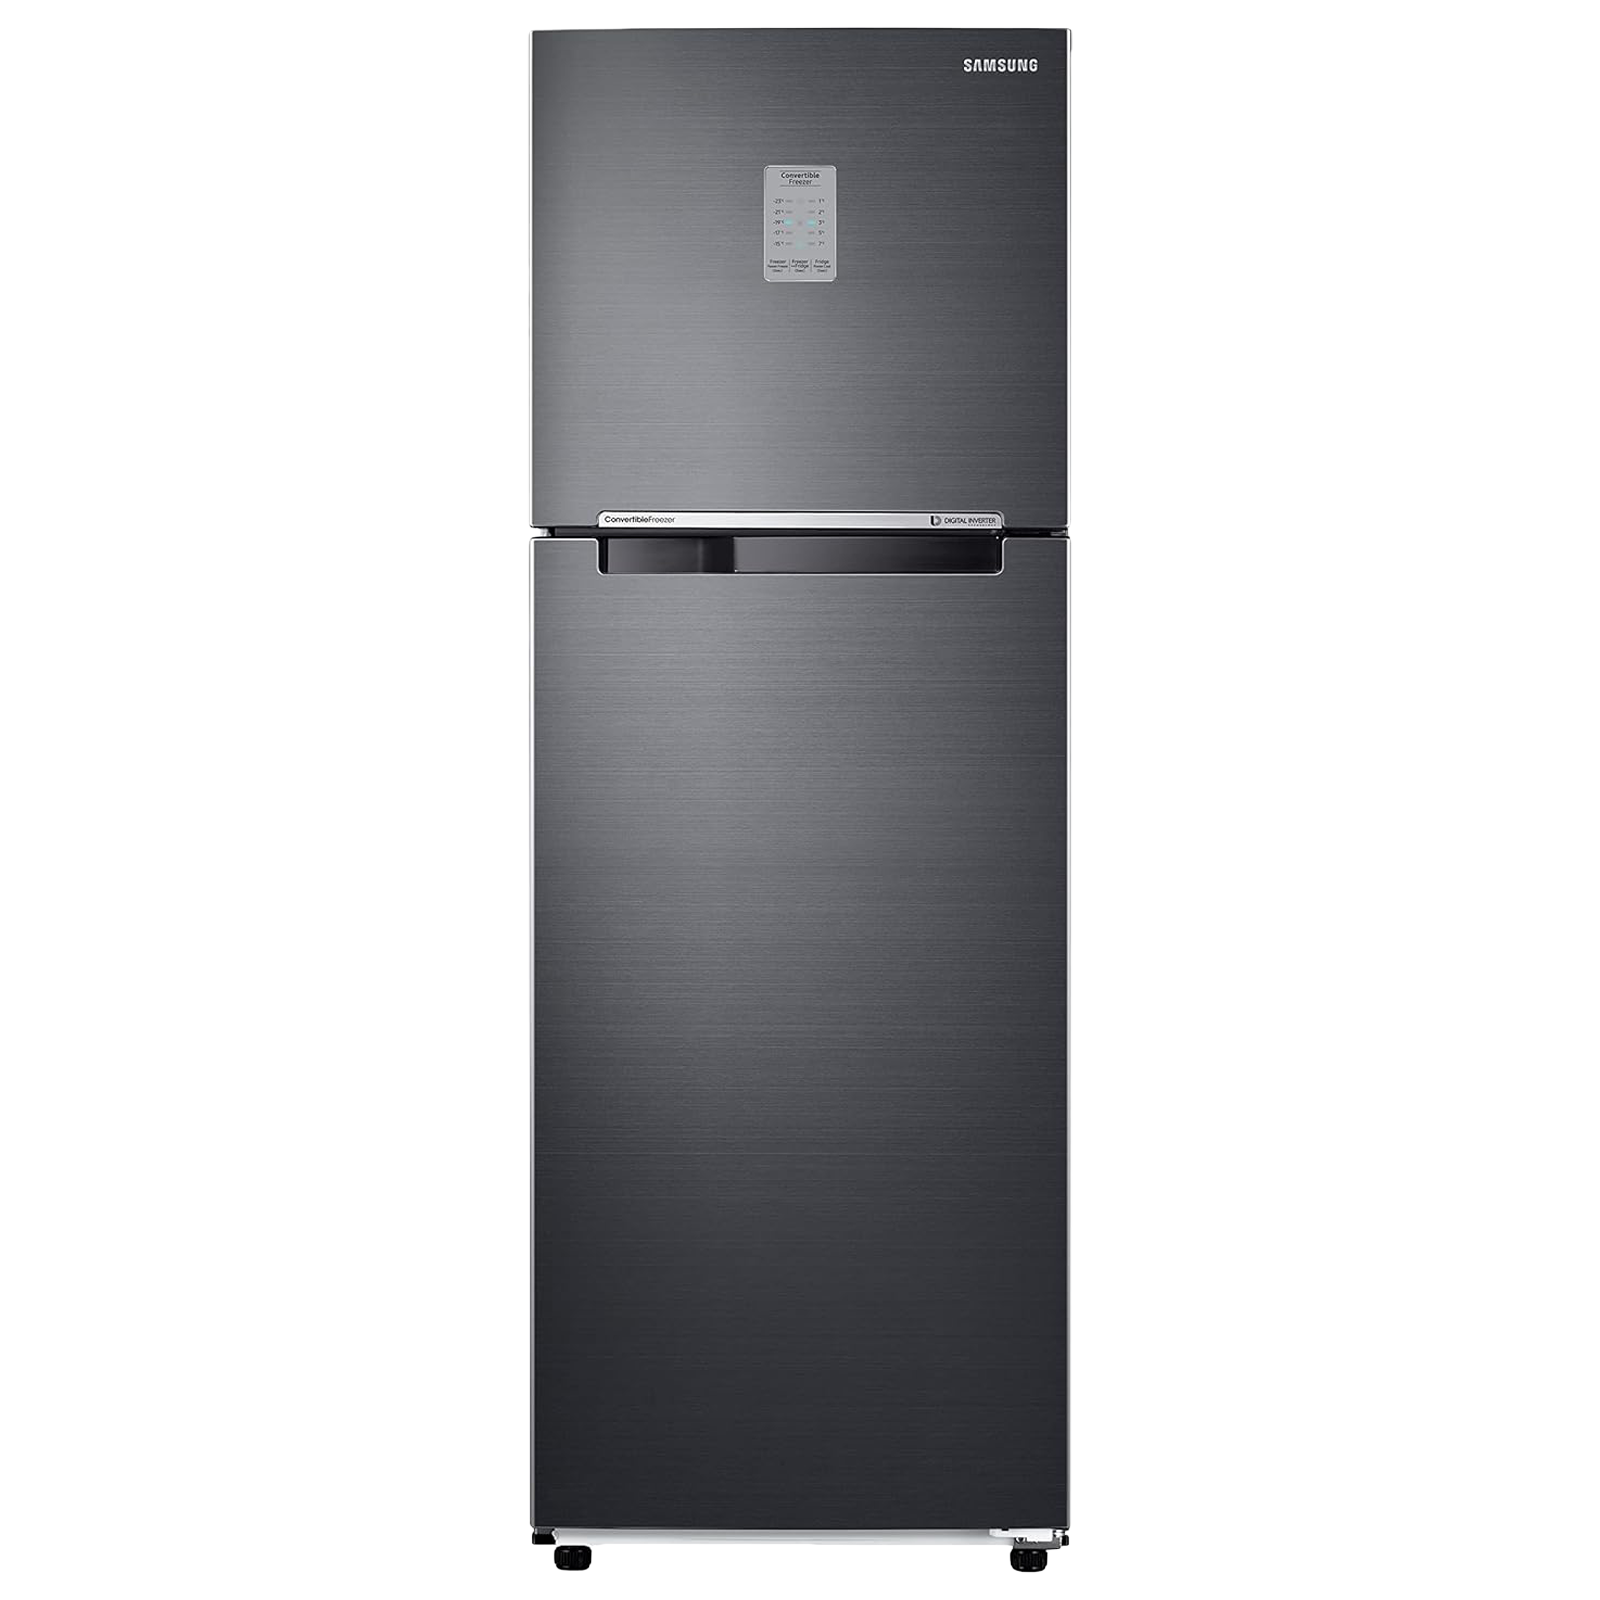 

SAMSUNG 256 Litres 2 Star Frost Free Double Door Convertible Refrigerator with Fruit and Vegetables Drawer (RT30C3732BXHL, Luxe Brown)